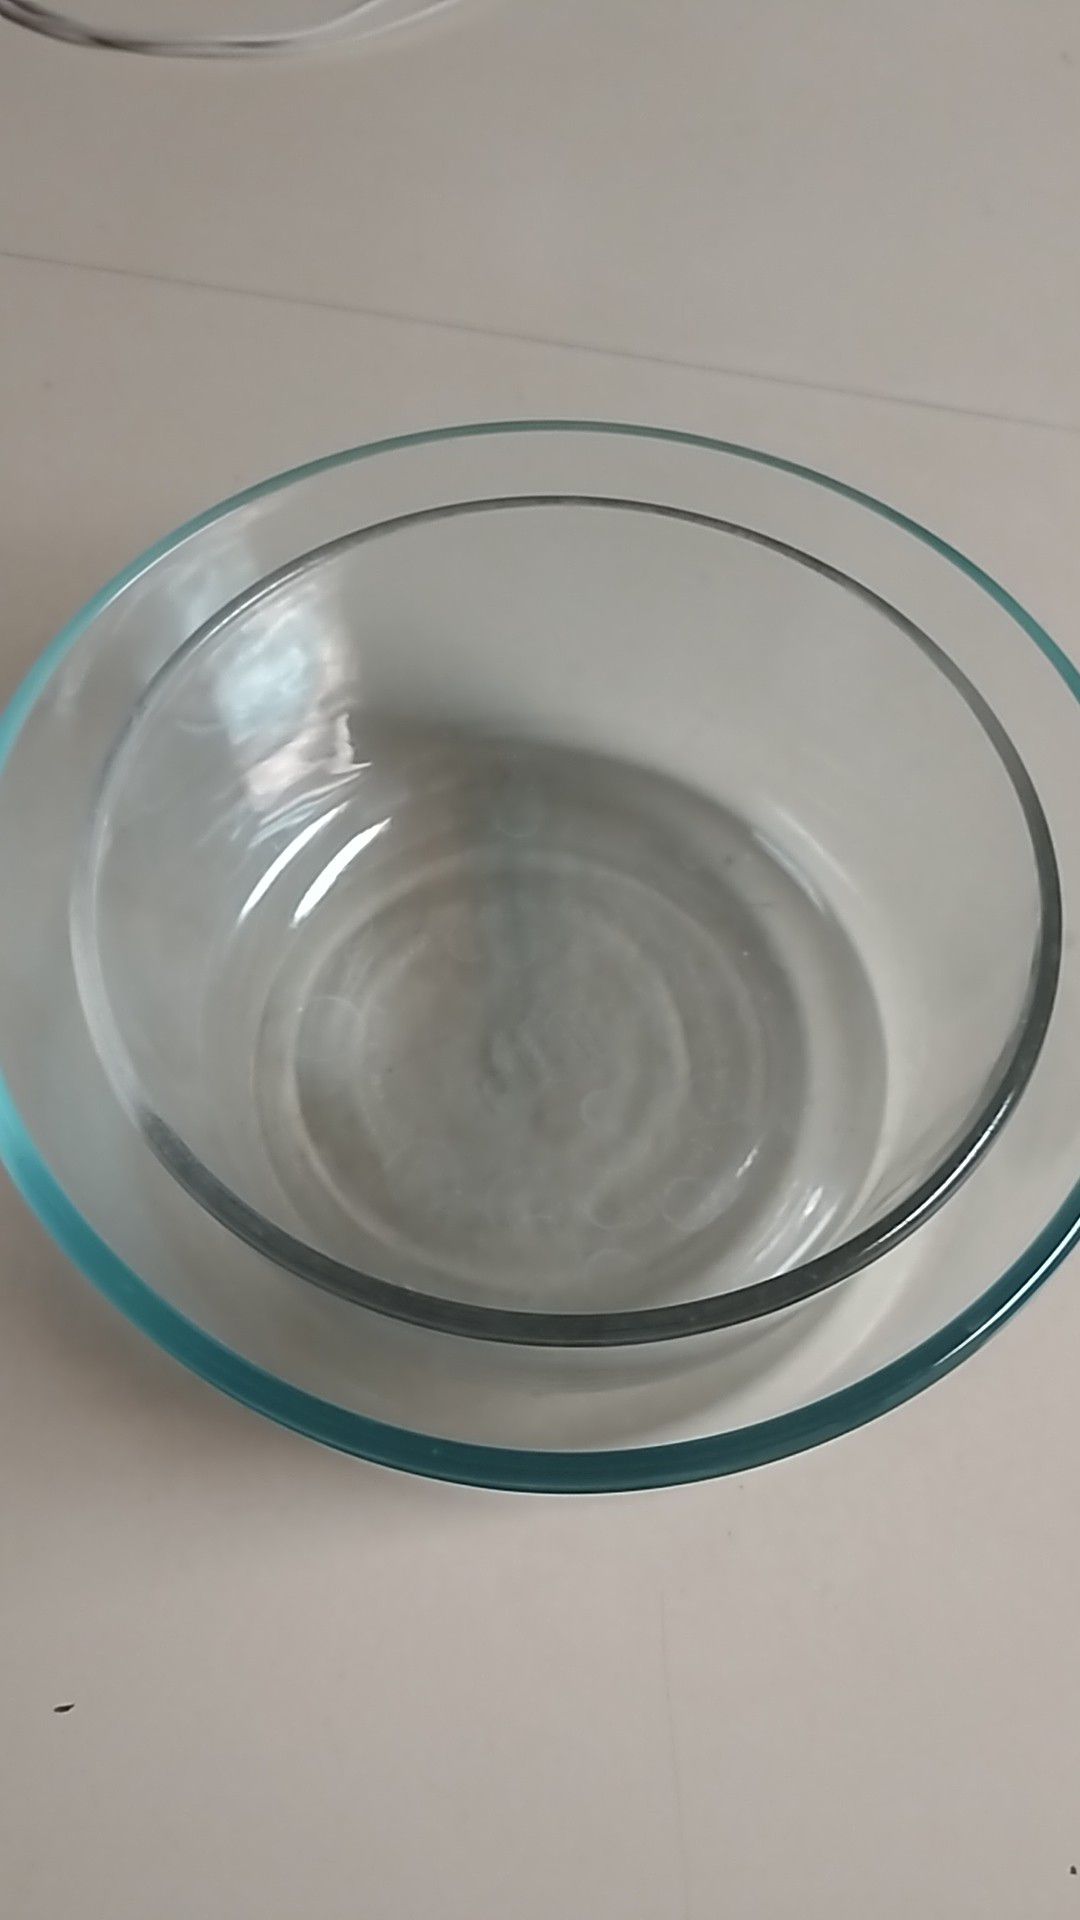 Pyrex bowls - 1 qt and 1.75 qt - OVER 💯 ITEMS FOR SALE